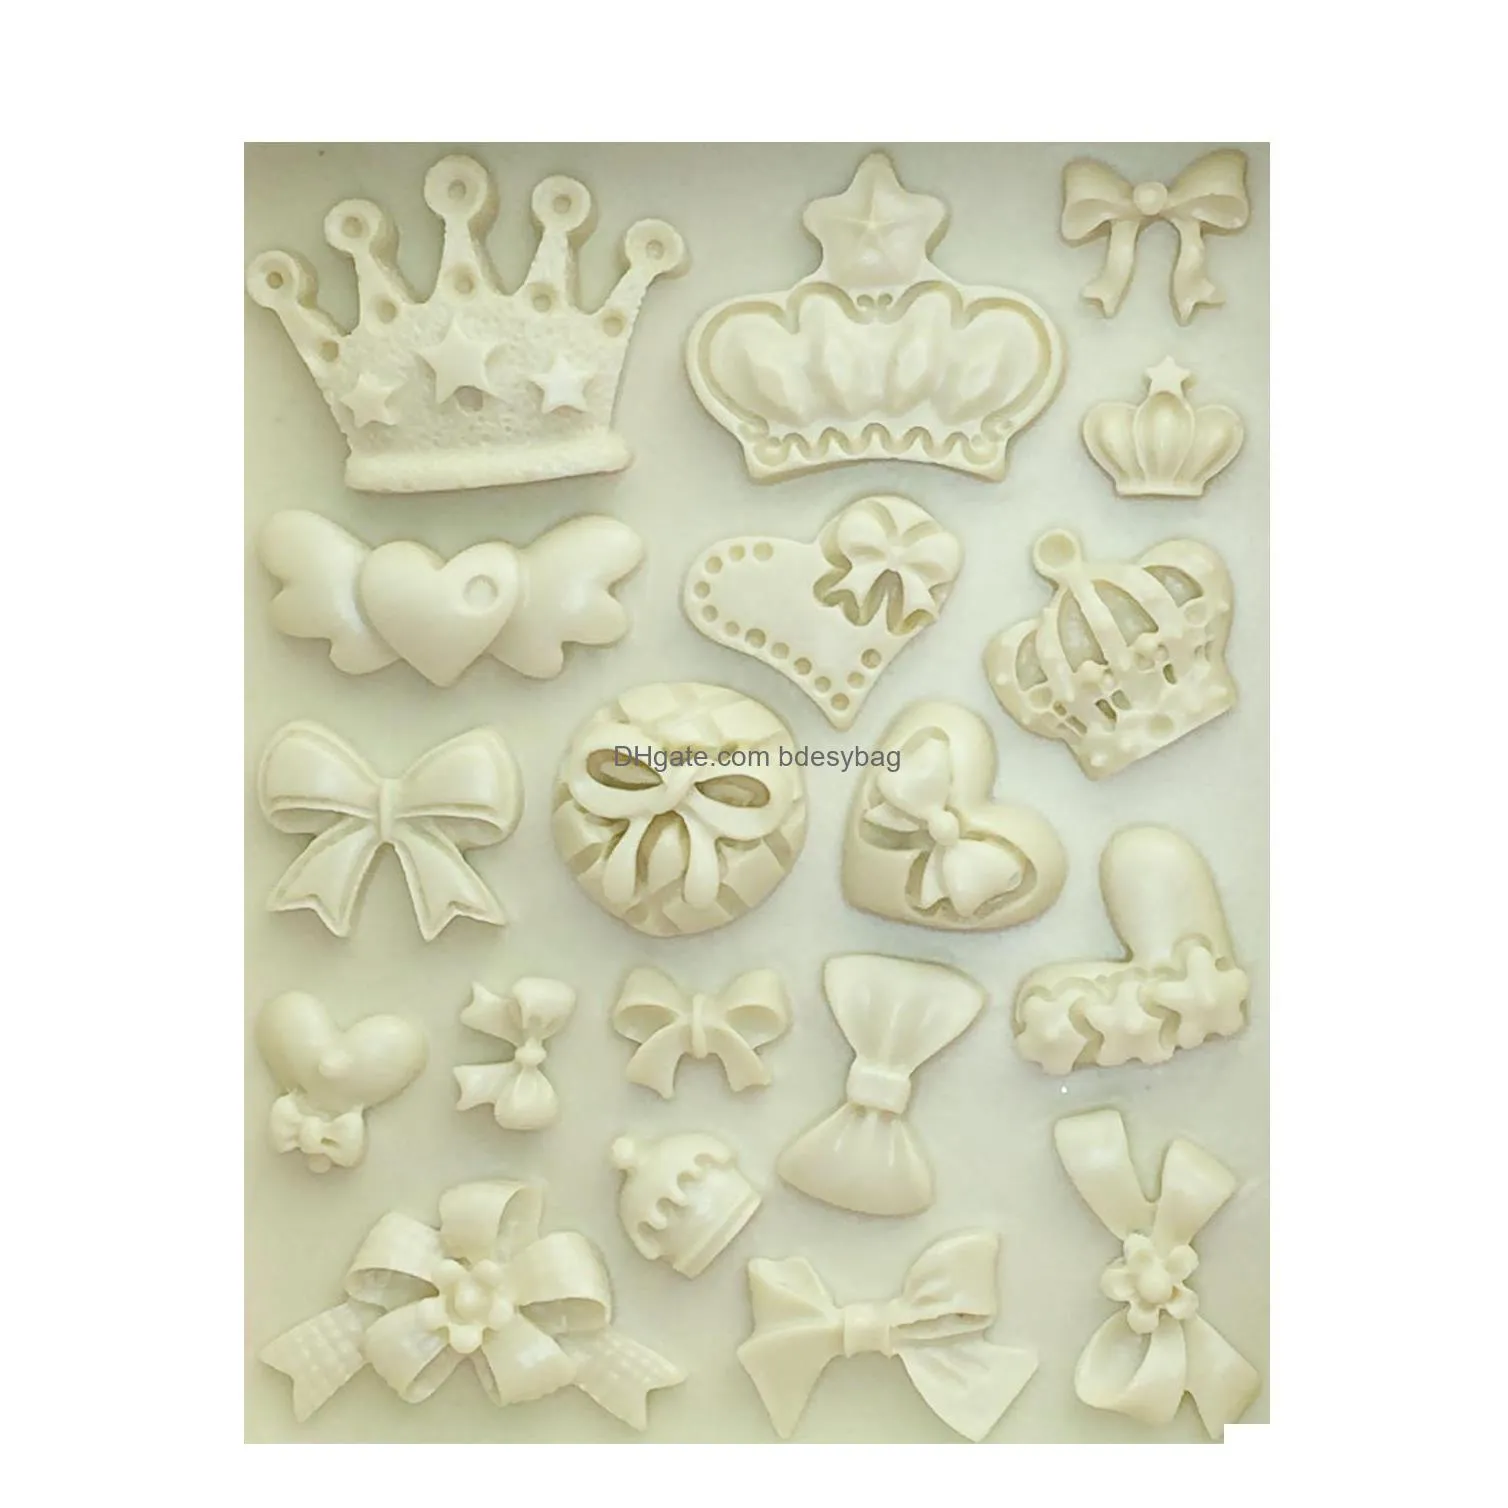 m0226 cartoon crown bow tie silicone fondant cake mold cupcake jelly candy chocolate cake decoration baking tool moulds